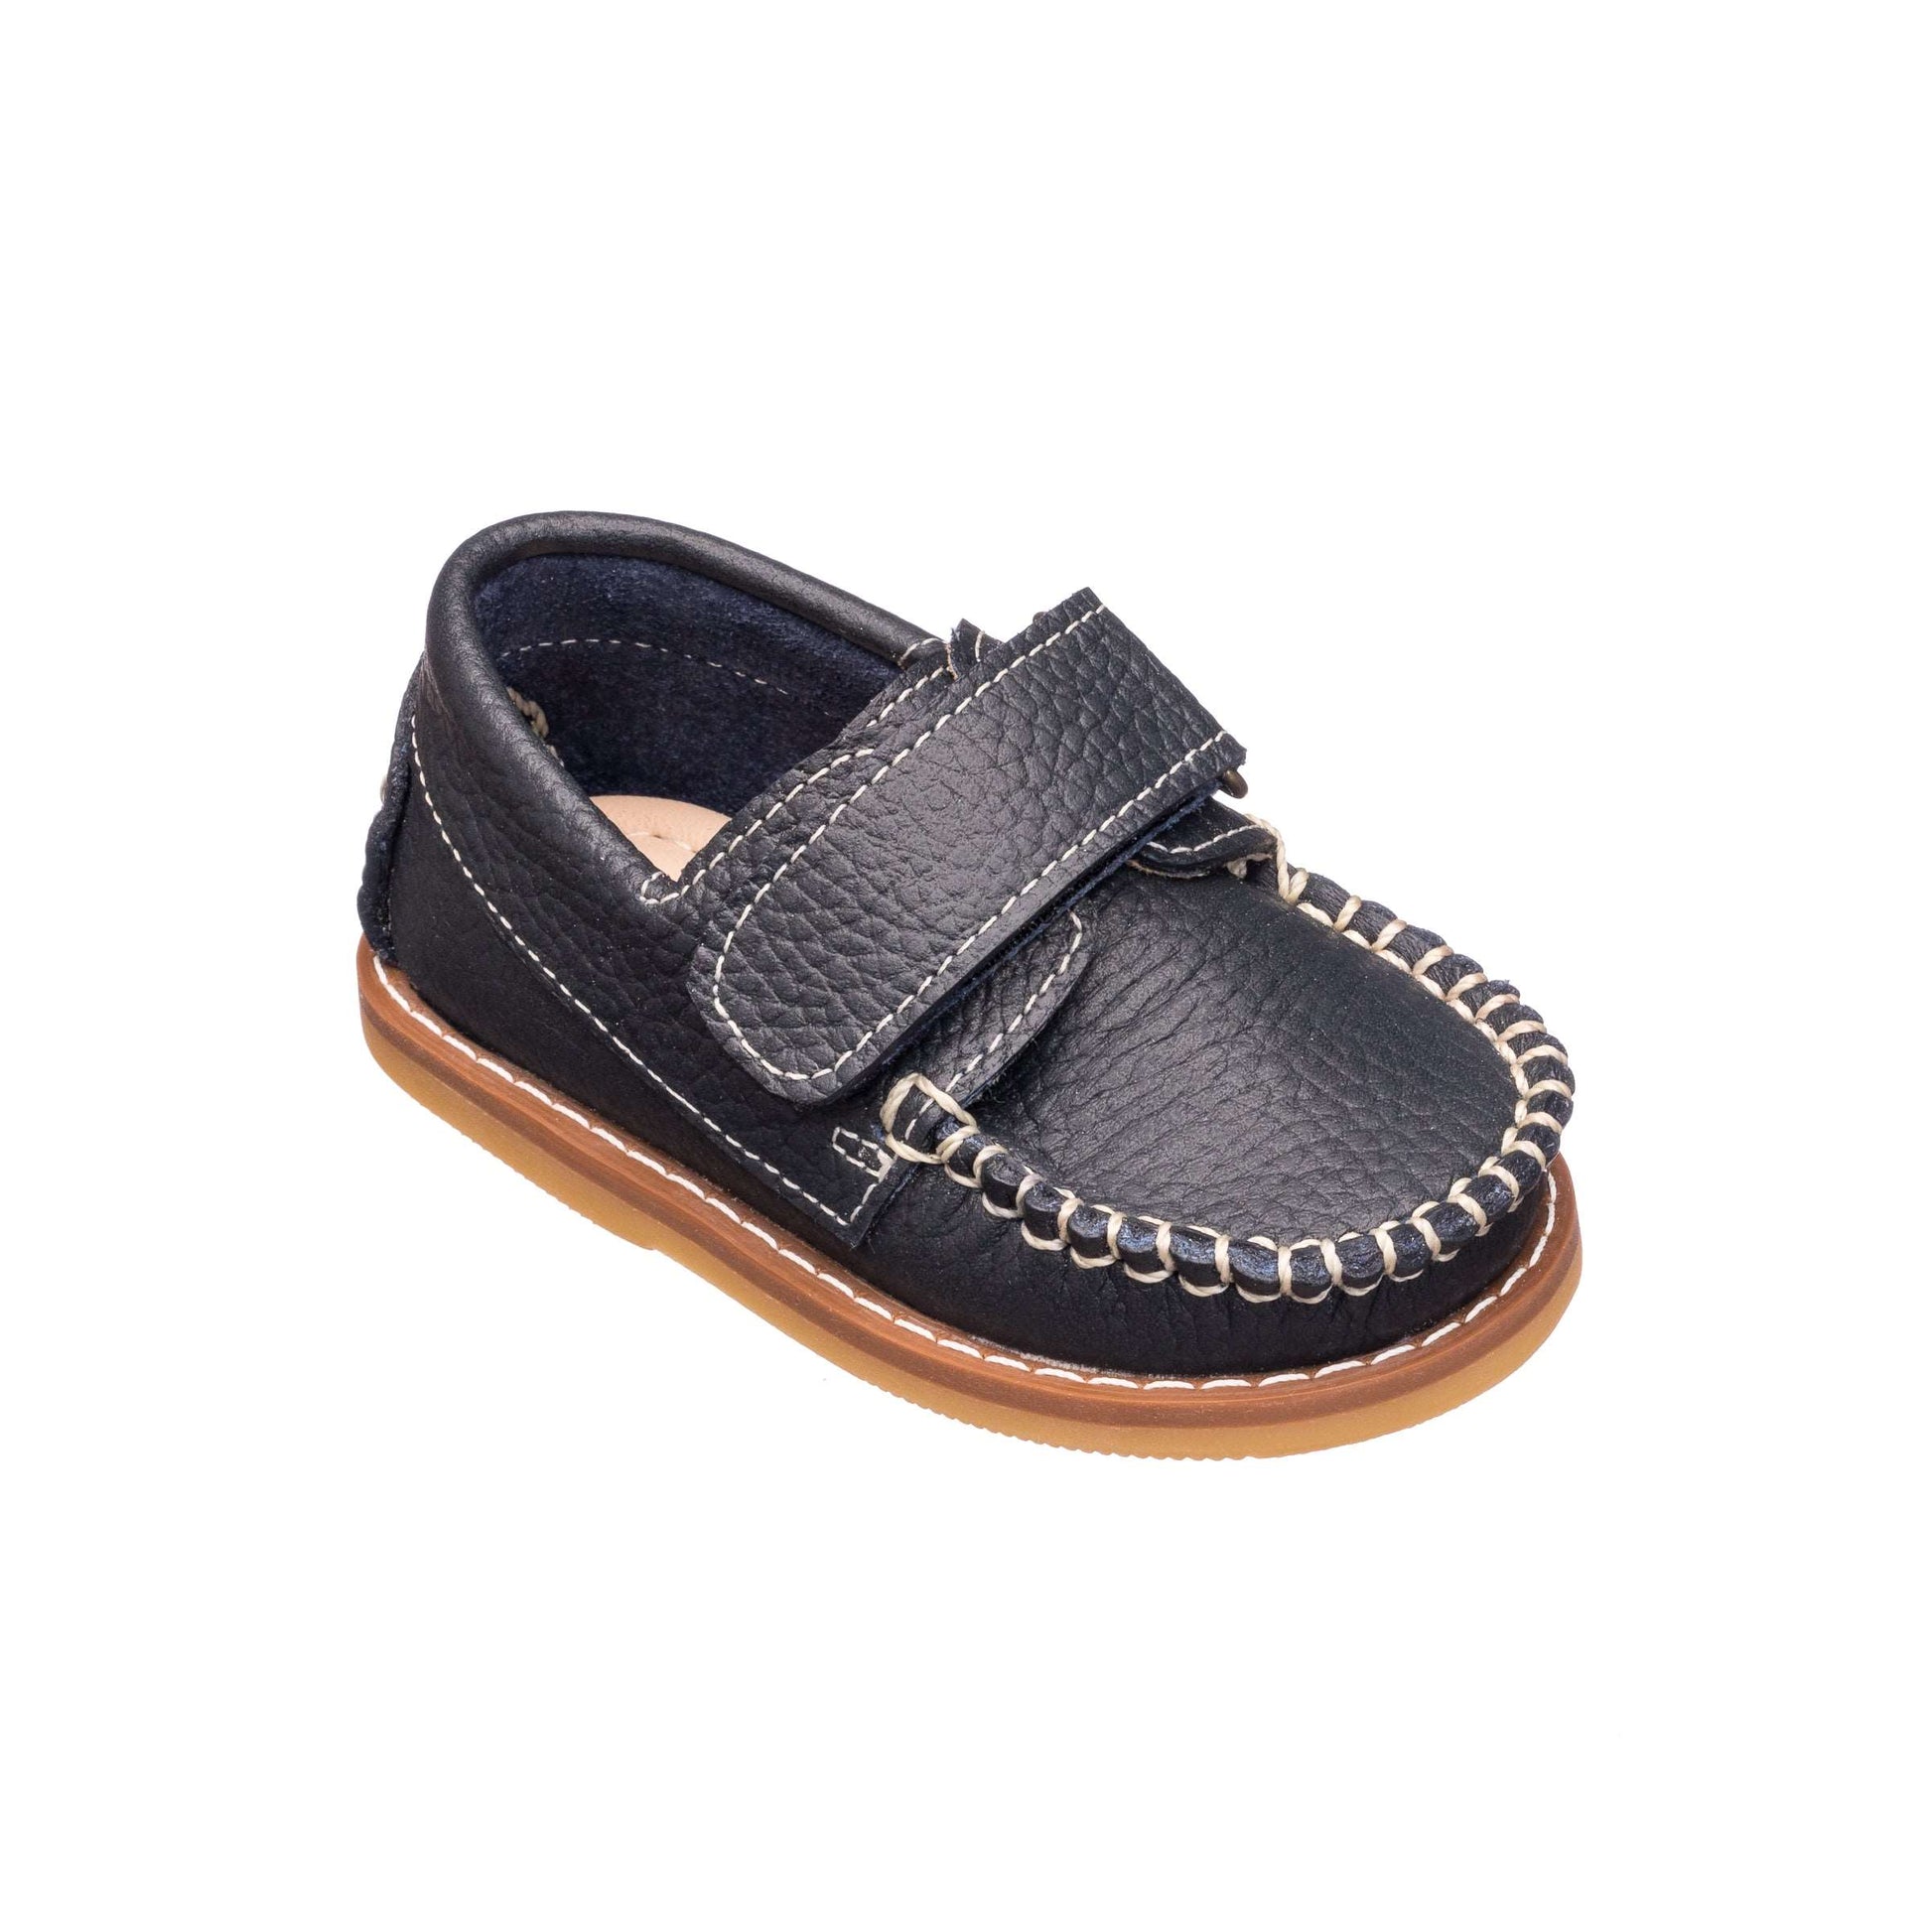 Nick Boating Shoe Toddlers Navy